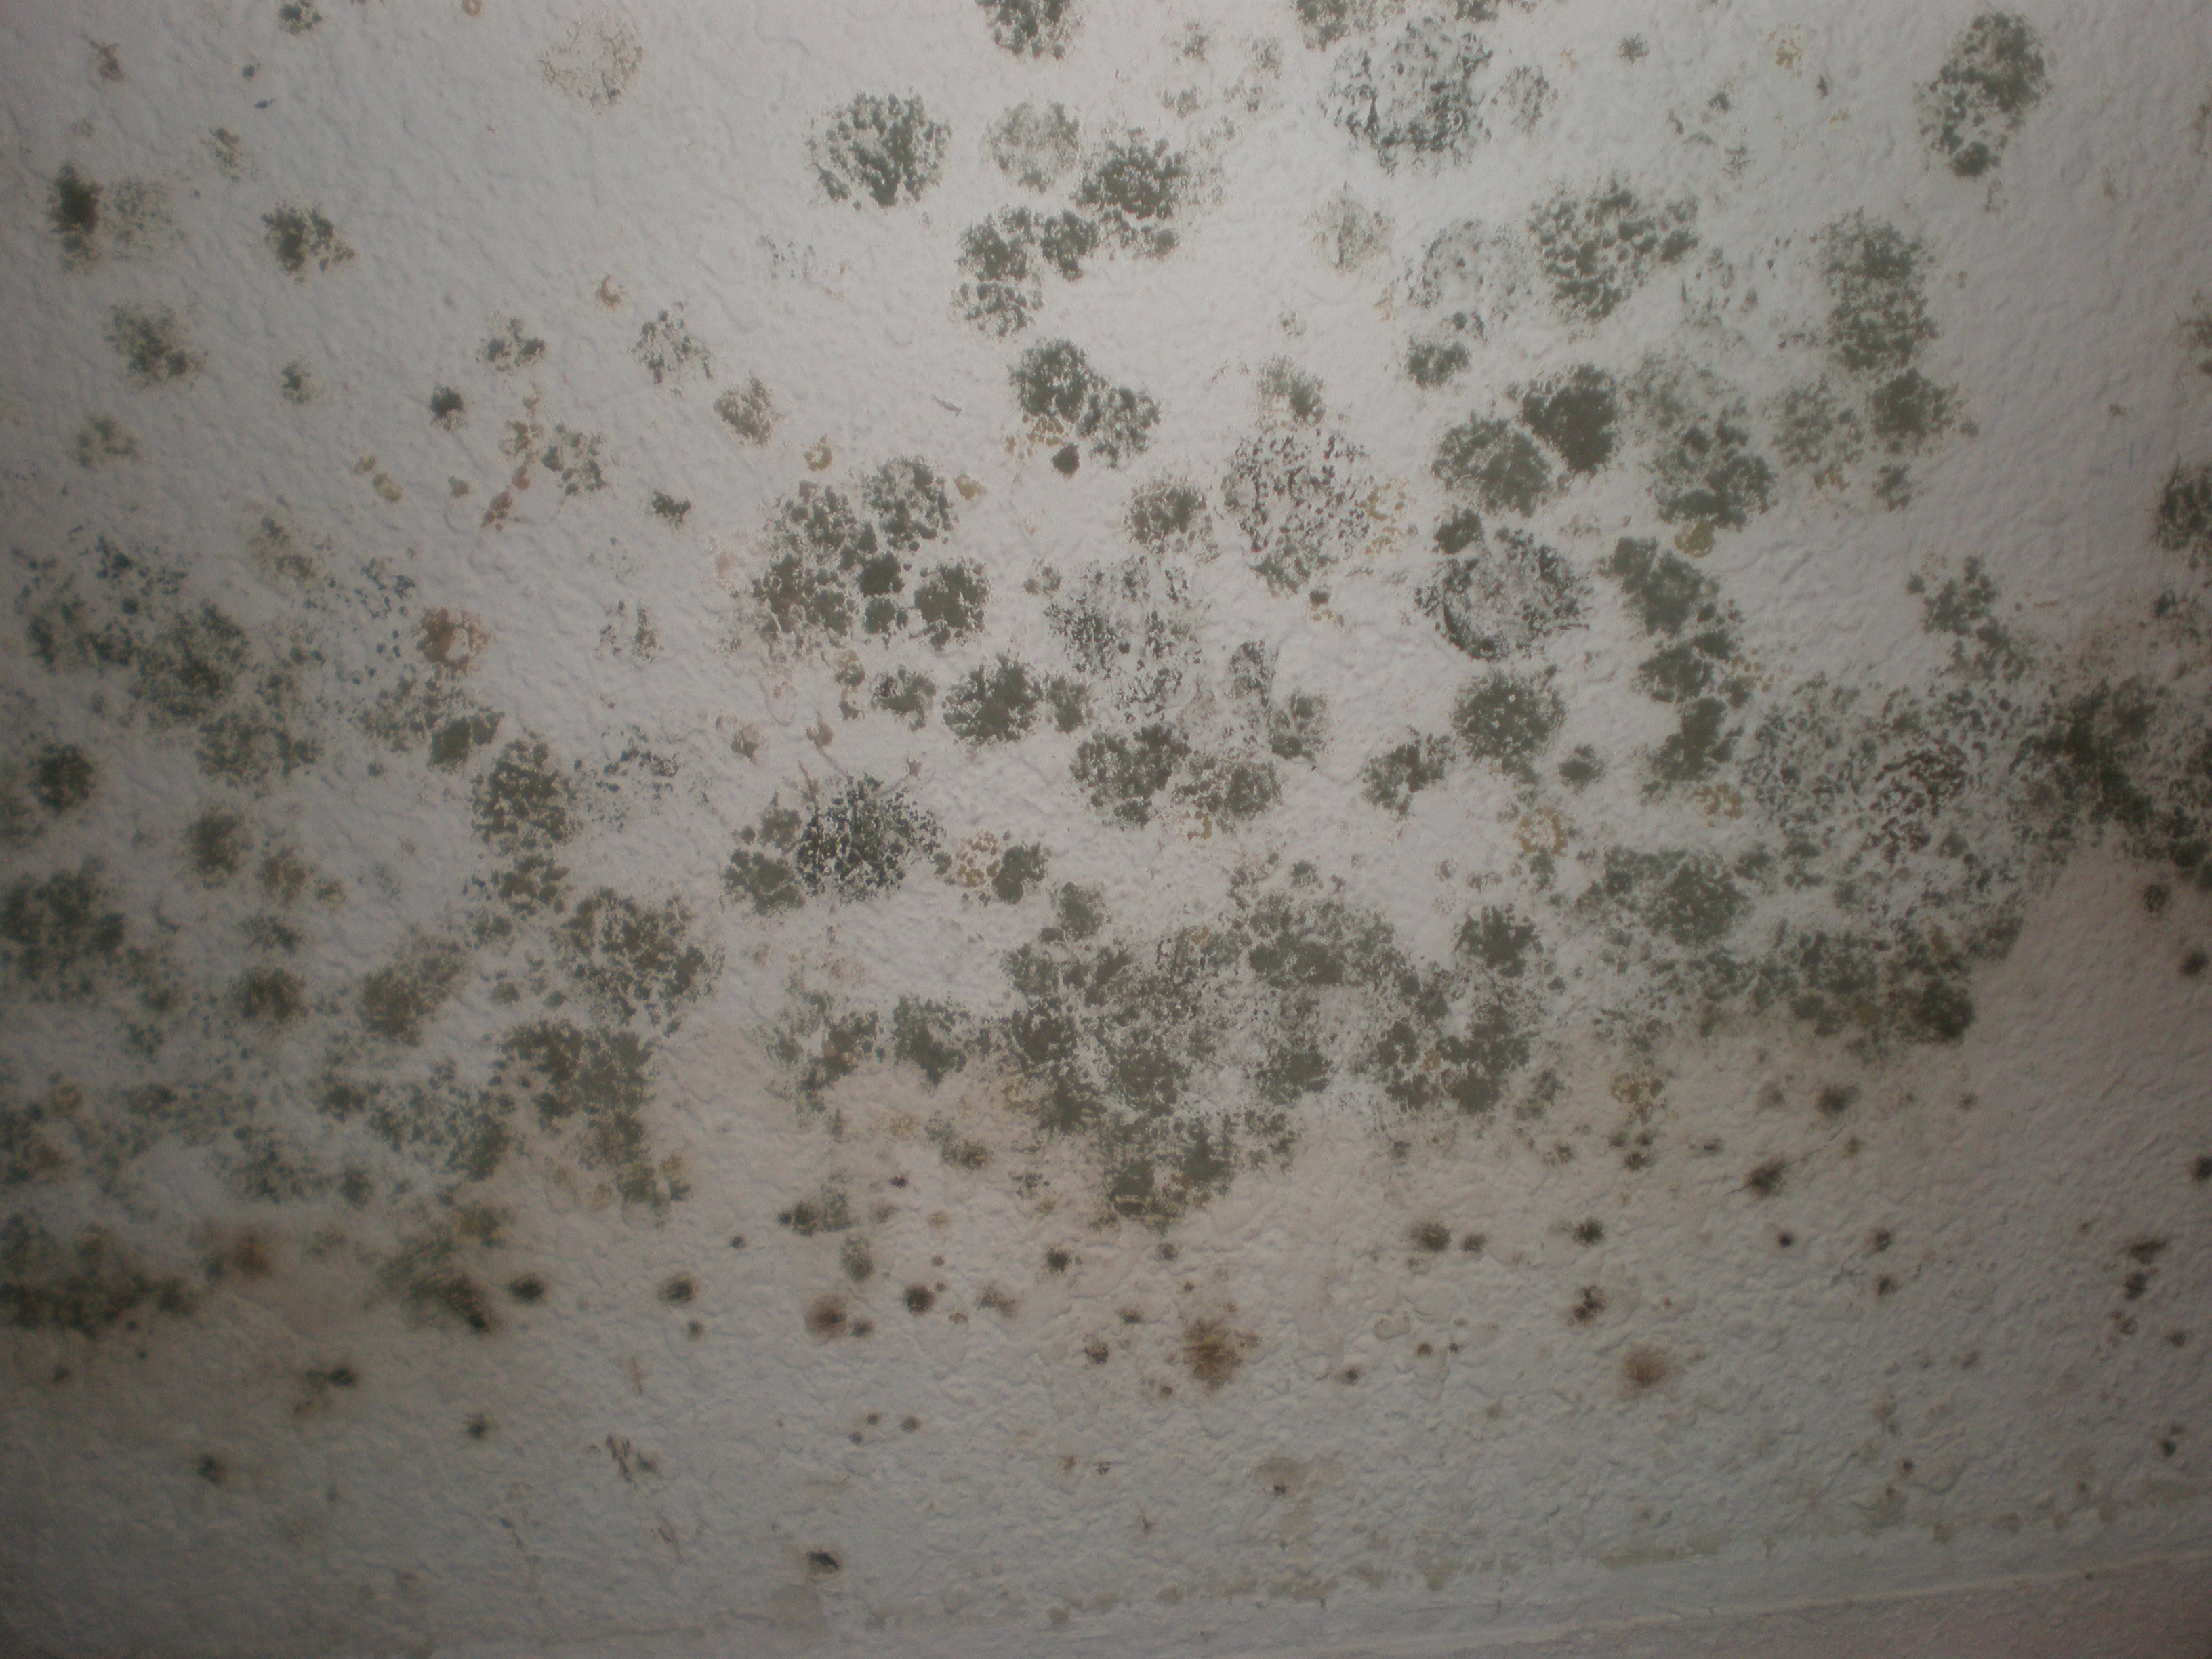 Black Mold Symptoms Test Removal Health Effects